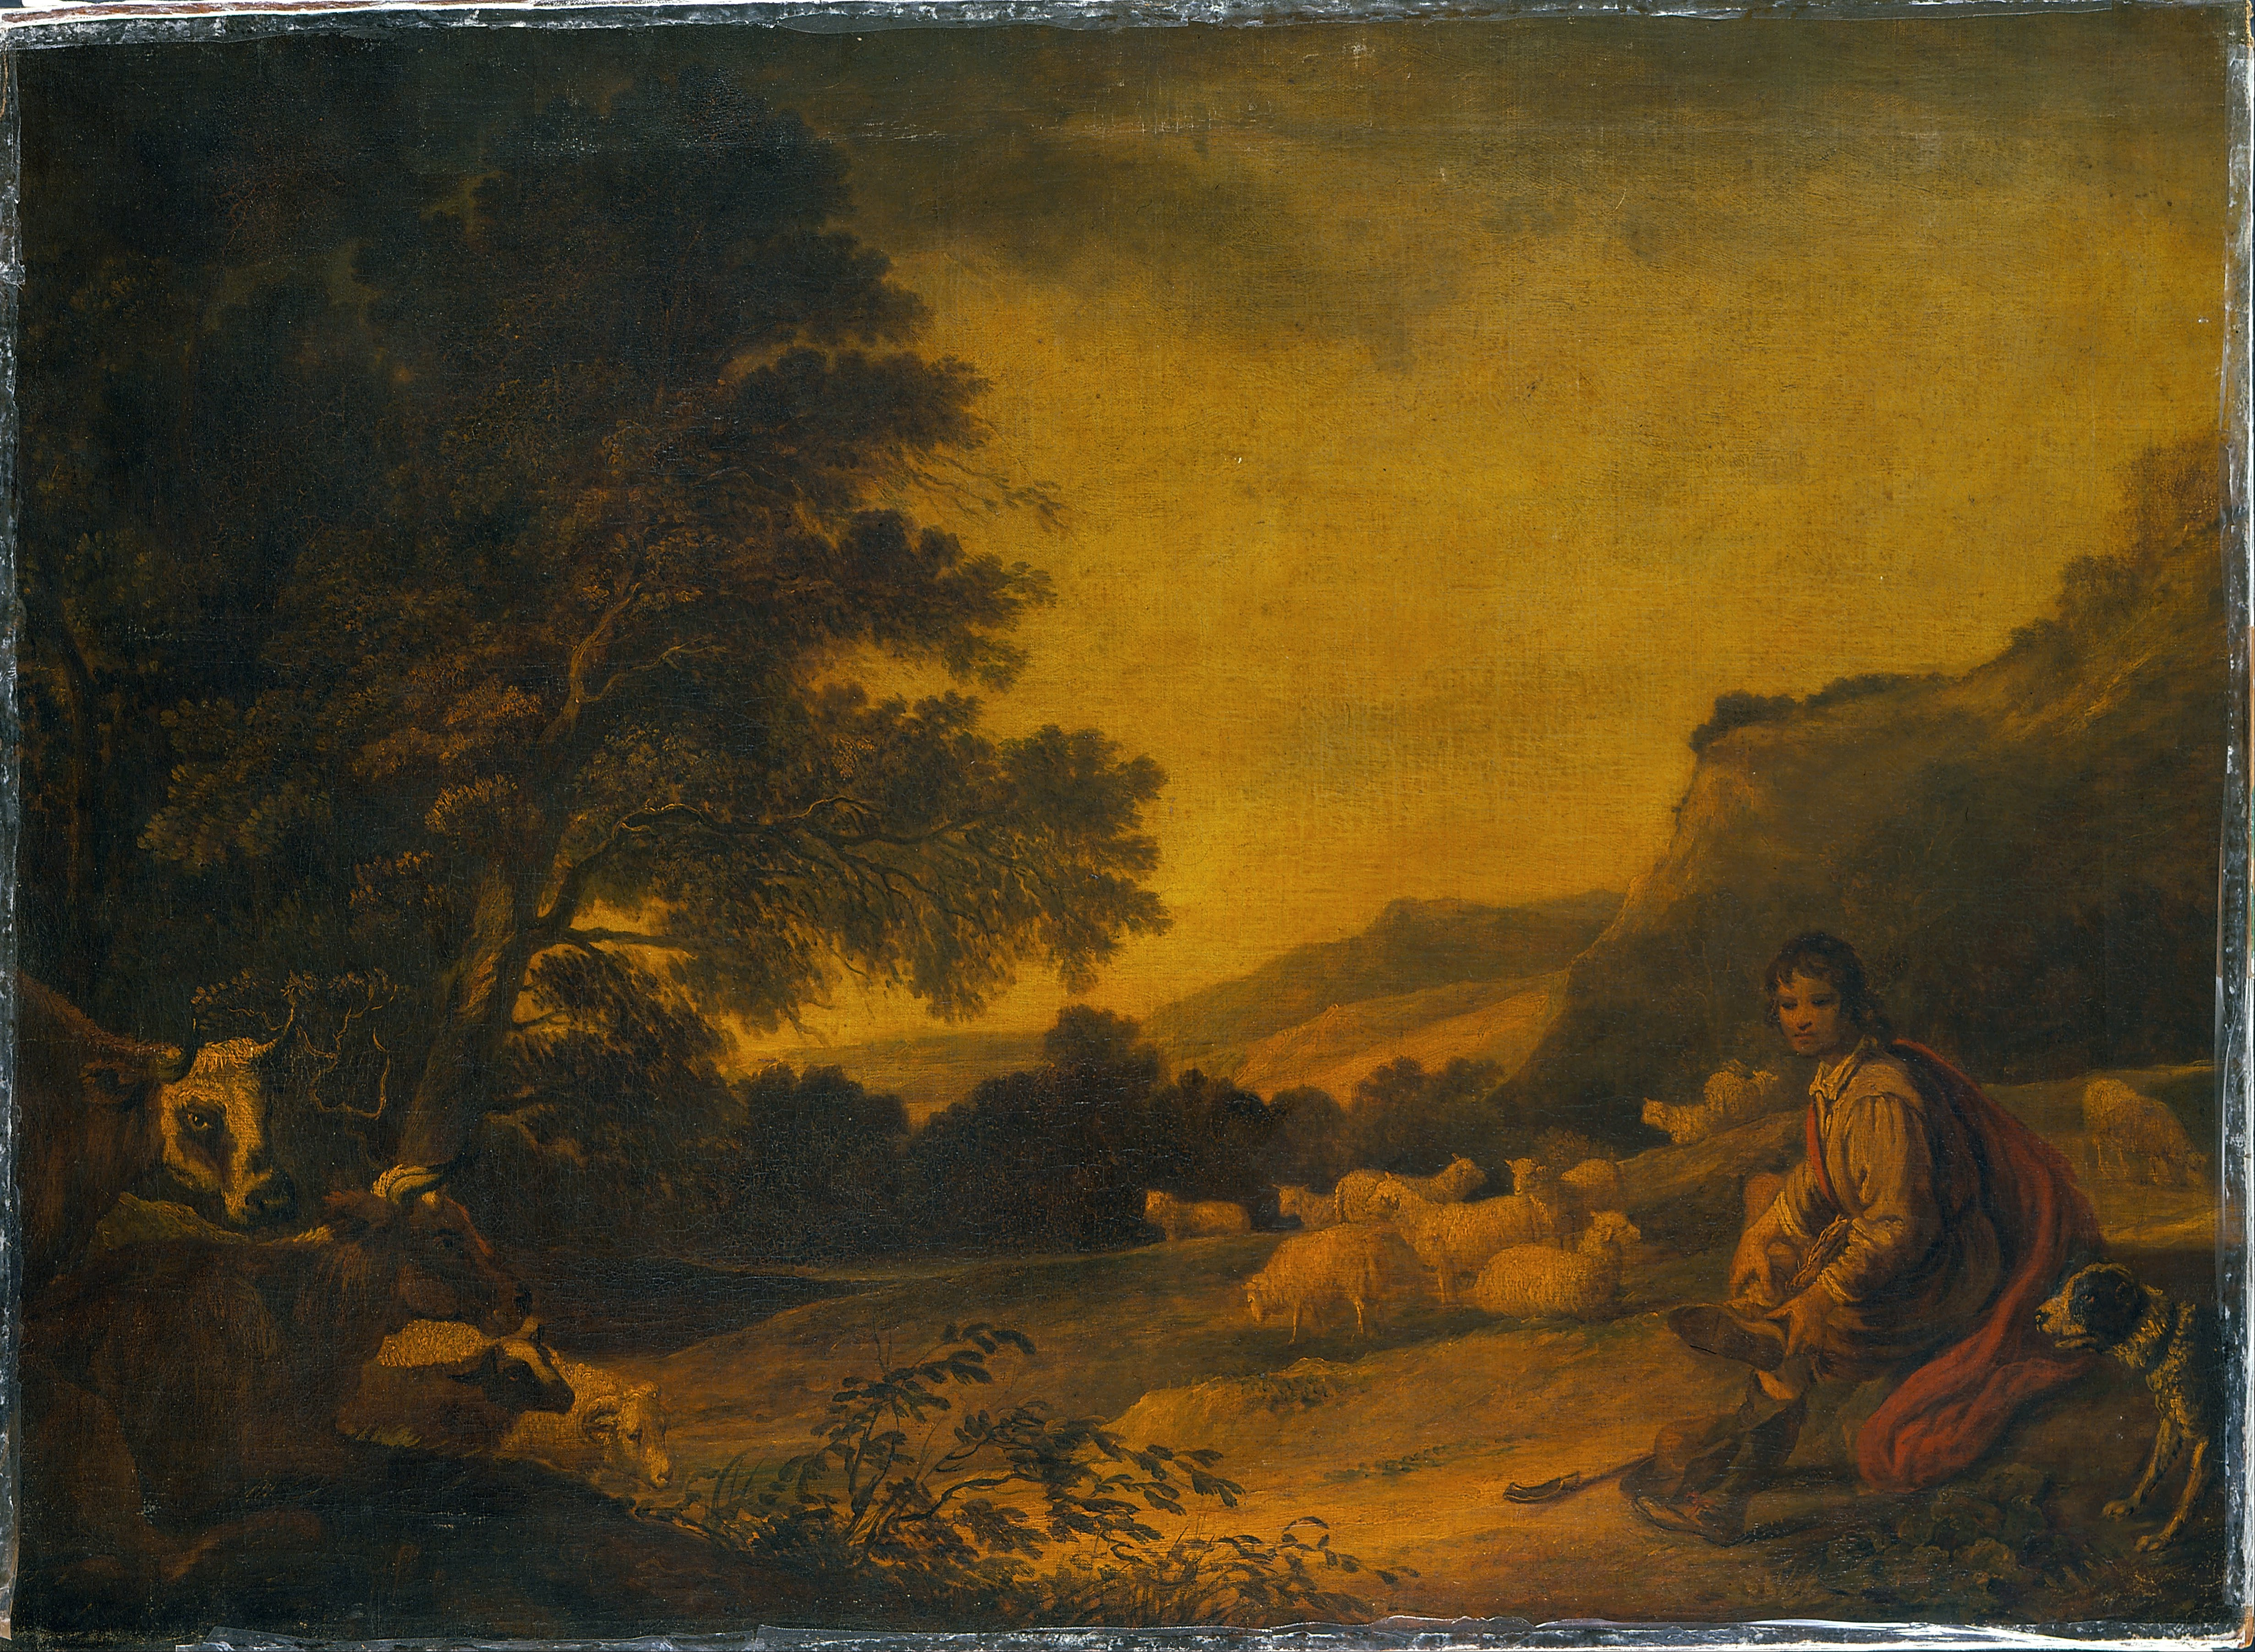 Bourgeois, Sir Peter Francis - Landscape with Cattle (A Young Sheperd with his Flock) - Google Art Project